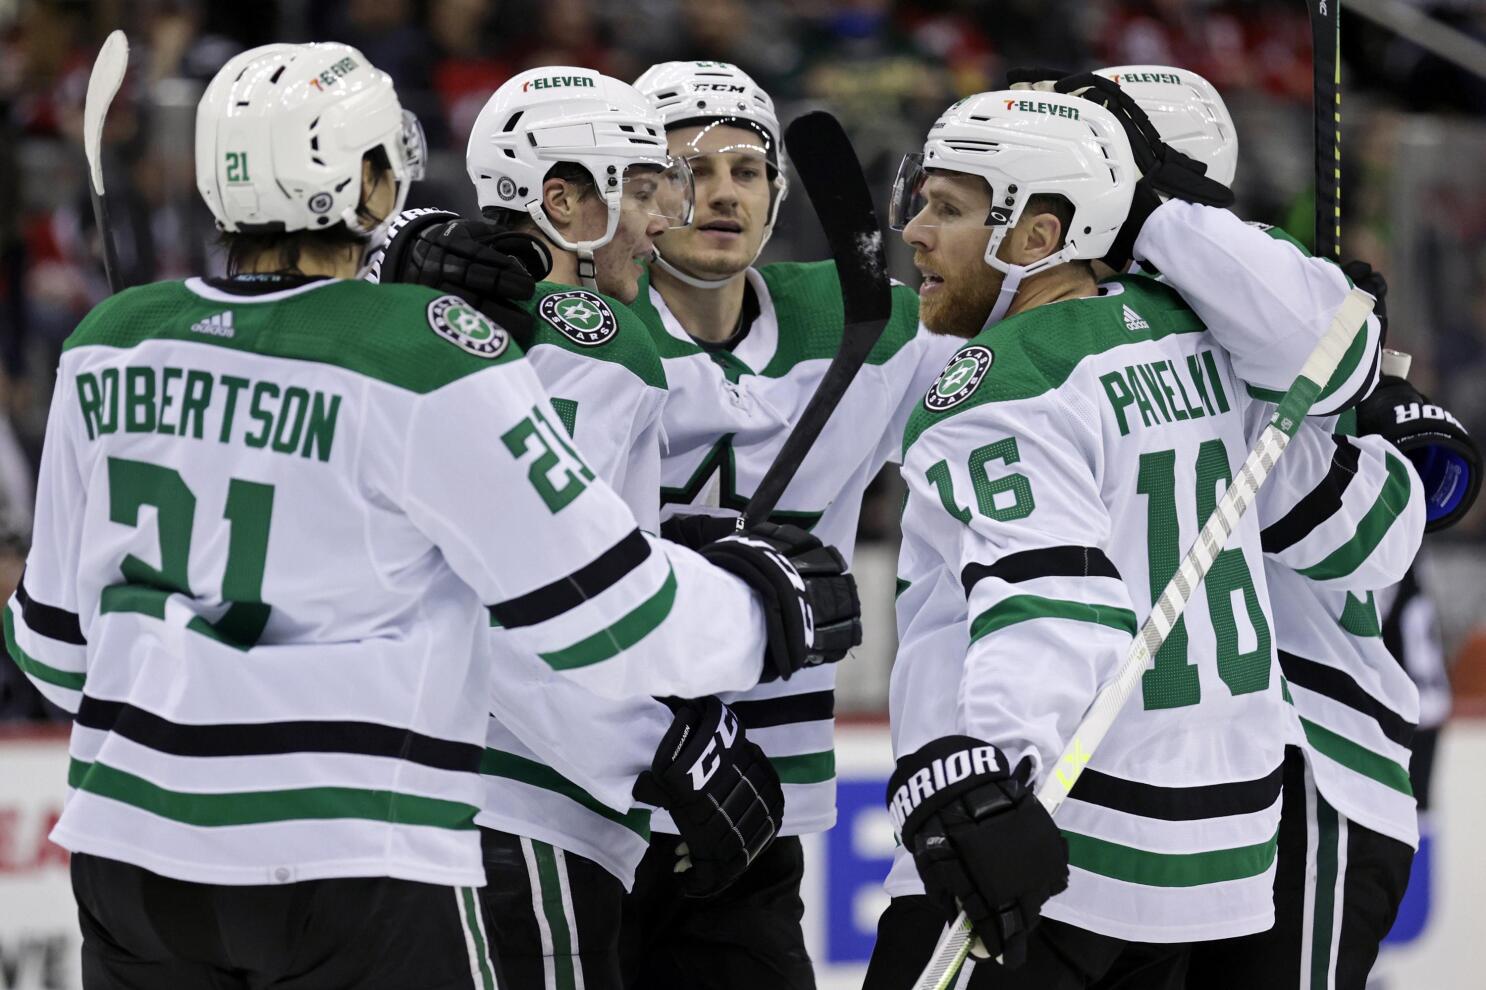 Pavelski leads Stars past Devils 5-1 for 4th straight win